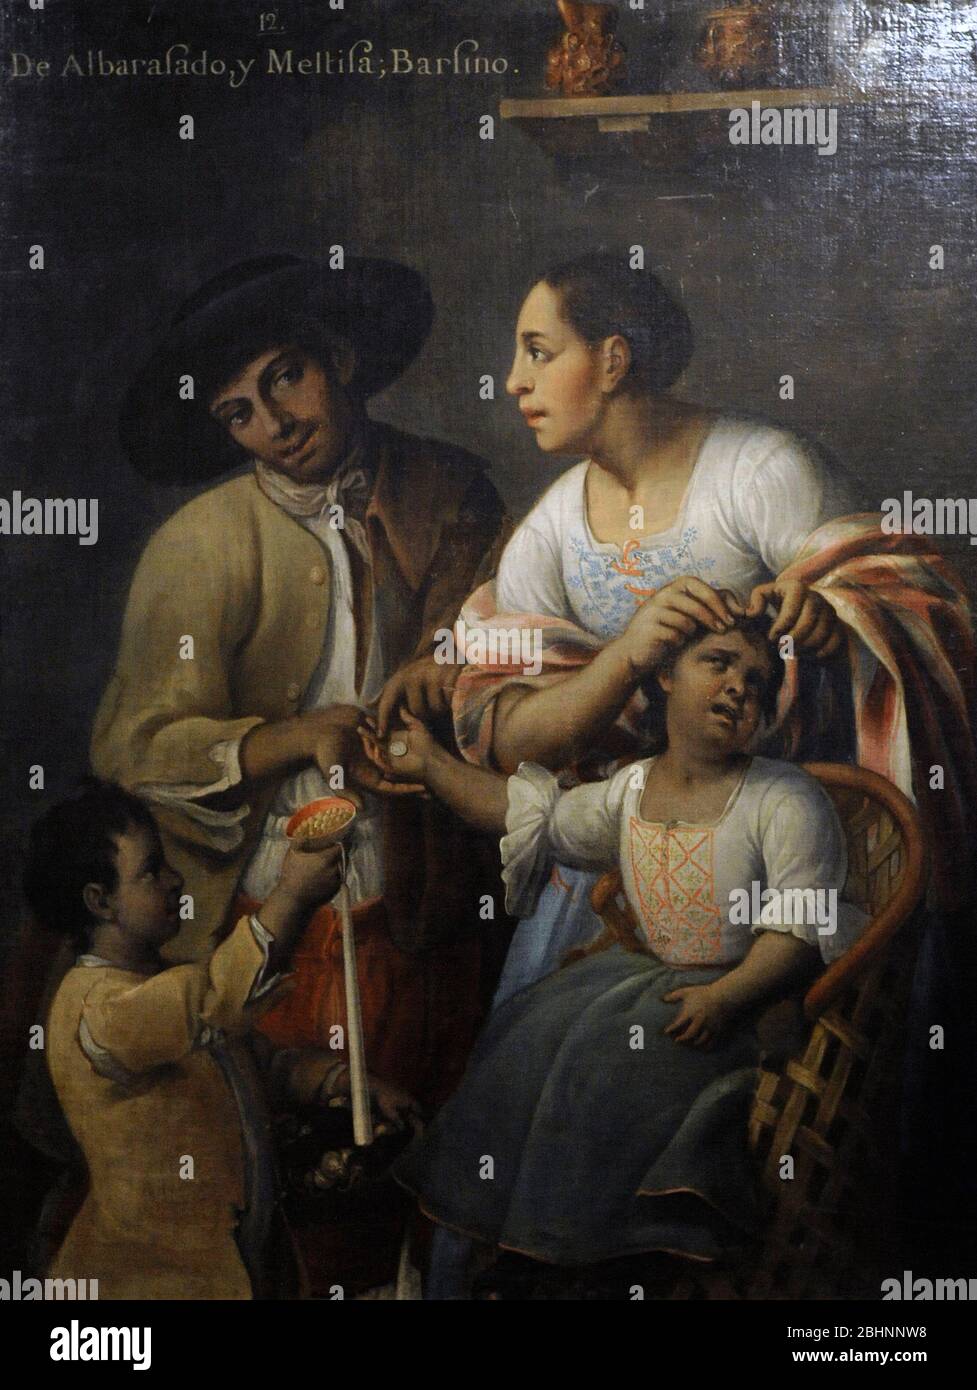 Casta Paintings, Mixed Race Family in Mexico